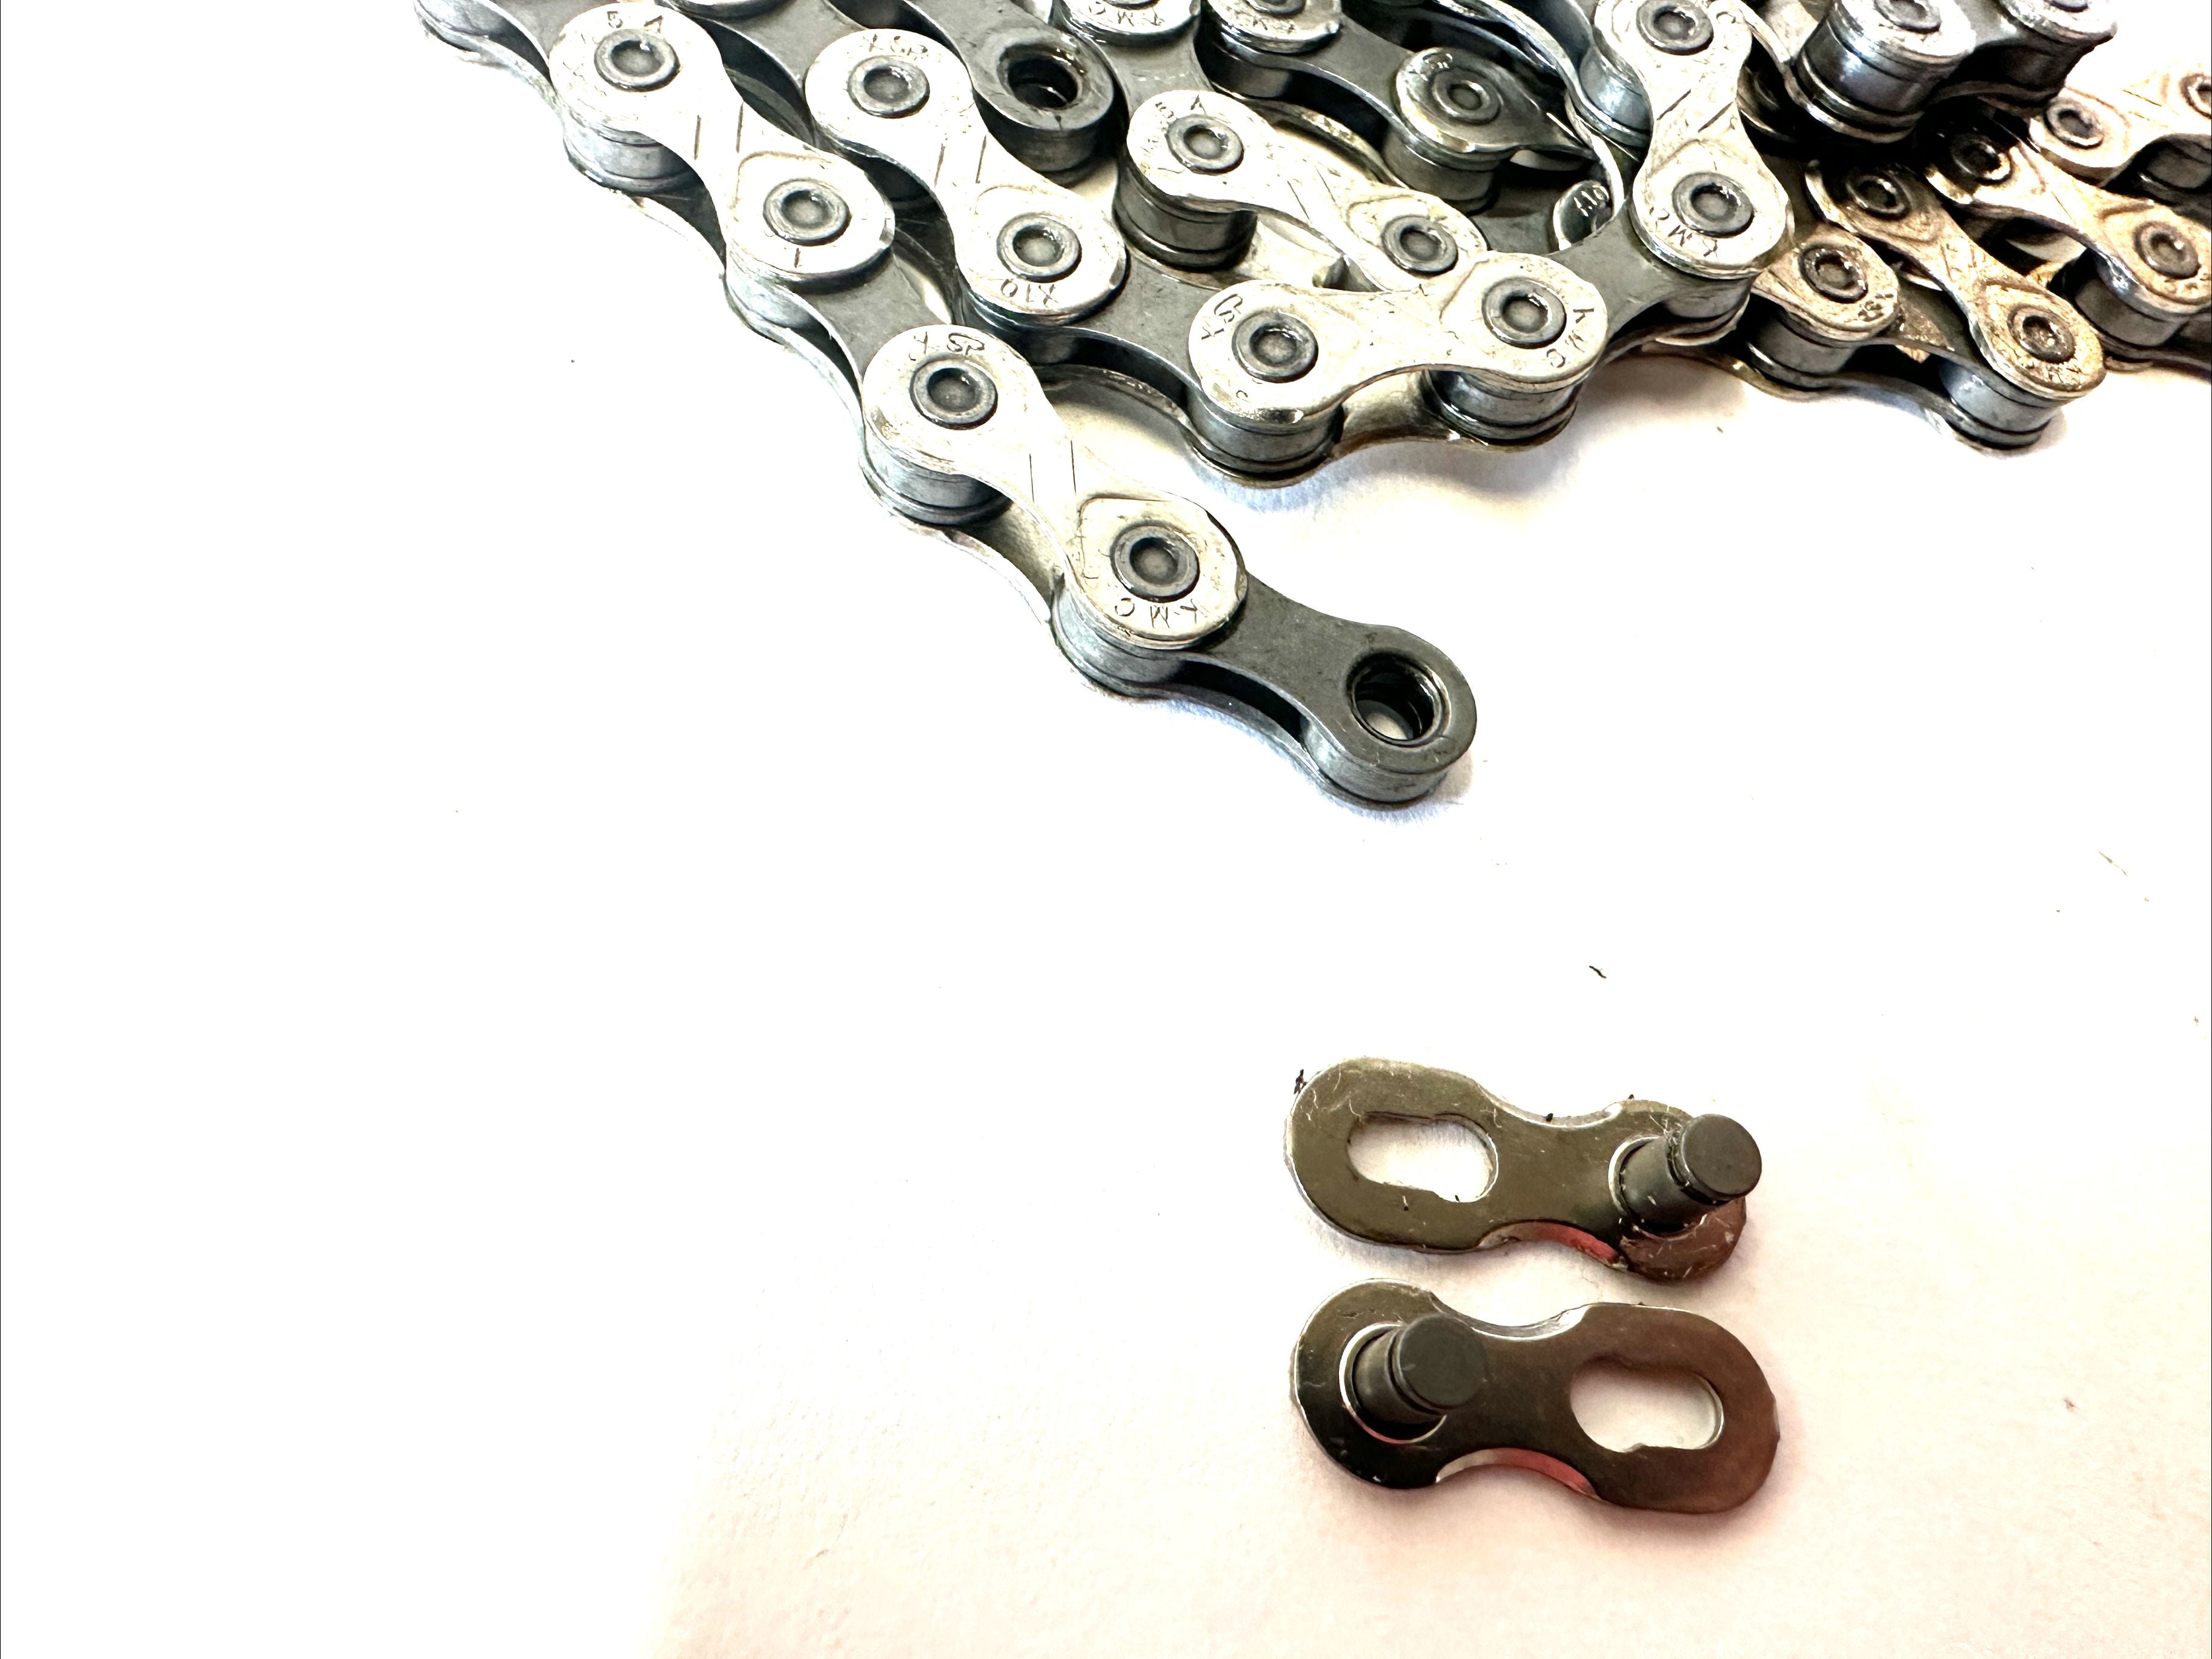 Lot of 2 KMC Chain 10 Speed X10 116 Link Mountain Road Bike Fit Shimano SRAM New